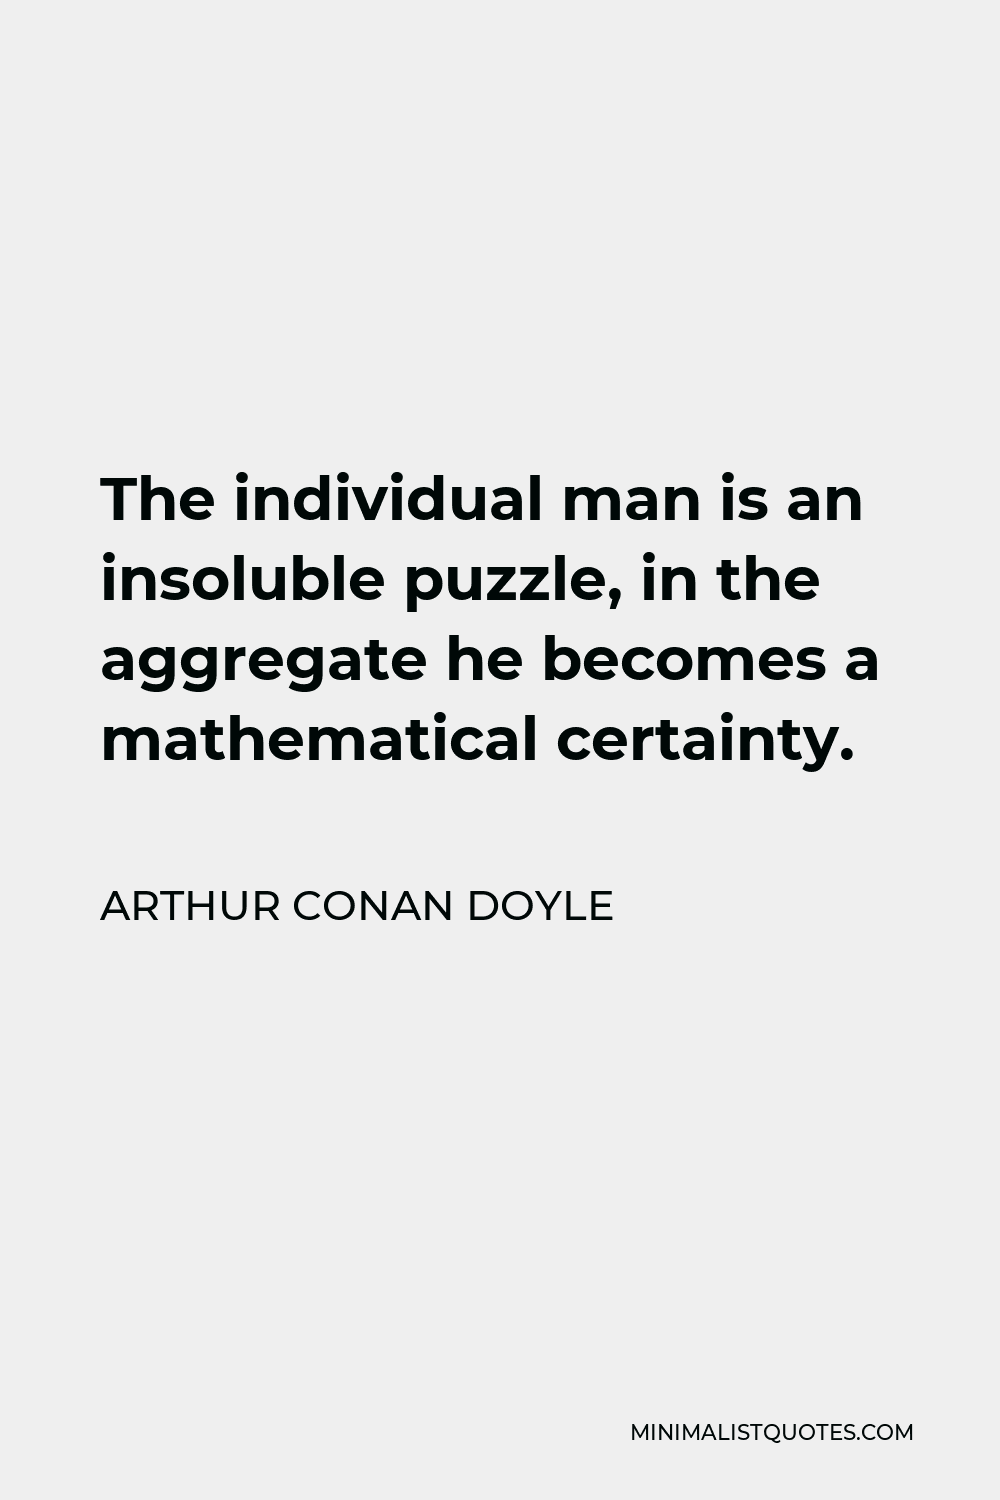 Arthur Conan Doyle Quote - The individual man is an insoluble puzzle, in the aggregate he becomes a mathematical certainty.